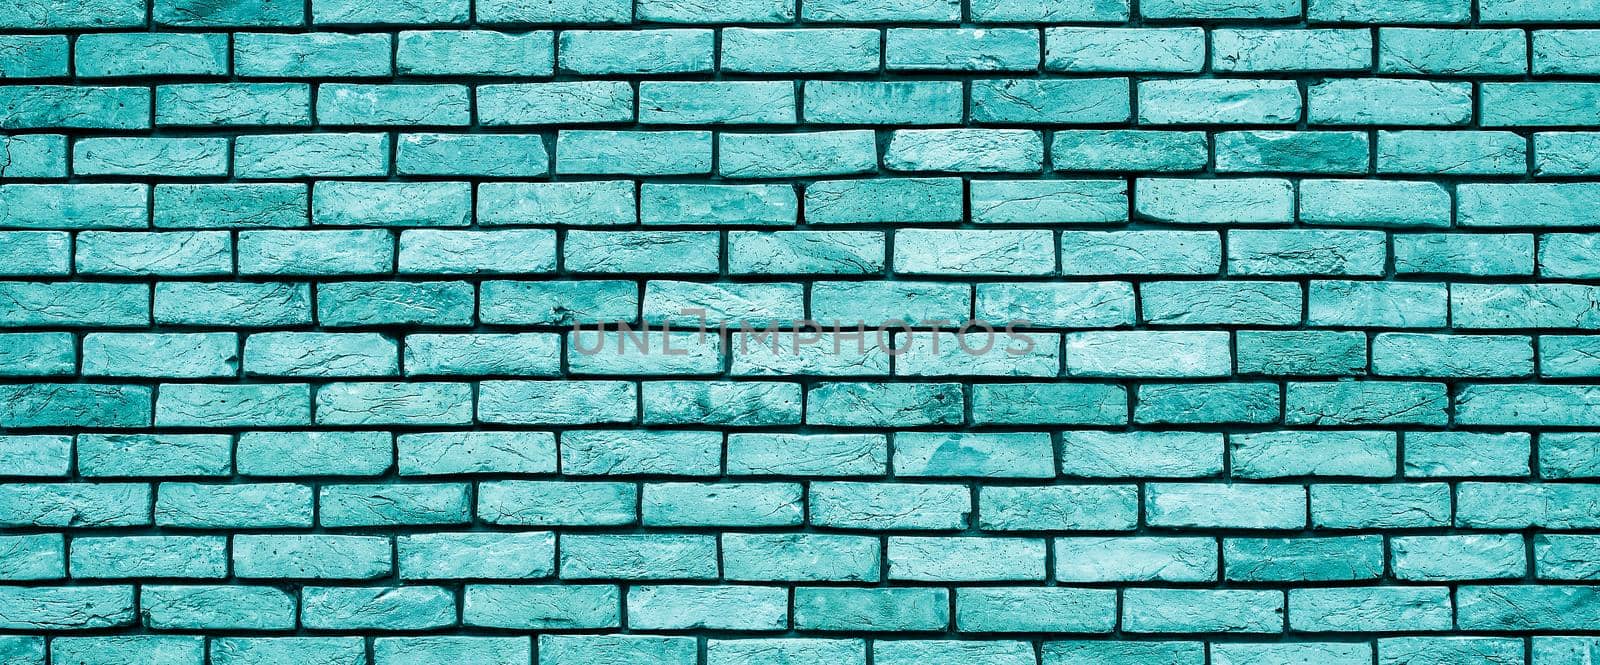 Bright blue Brick wall texture close up. Top view. Modern brick wall wallpaper design for web or graphic art projects. Abstract background for business cards and covers. Template or mock up.